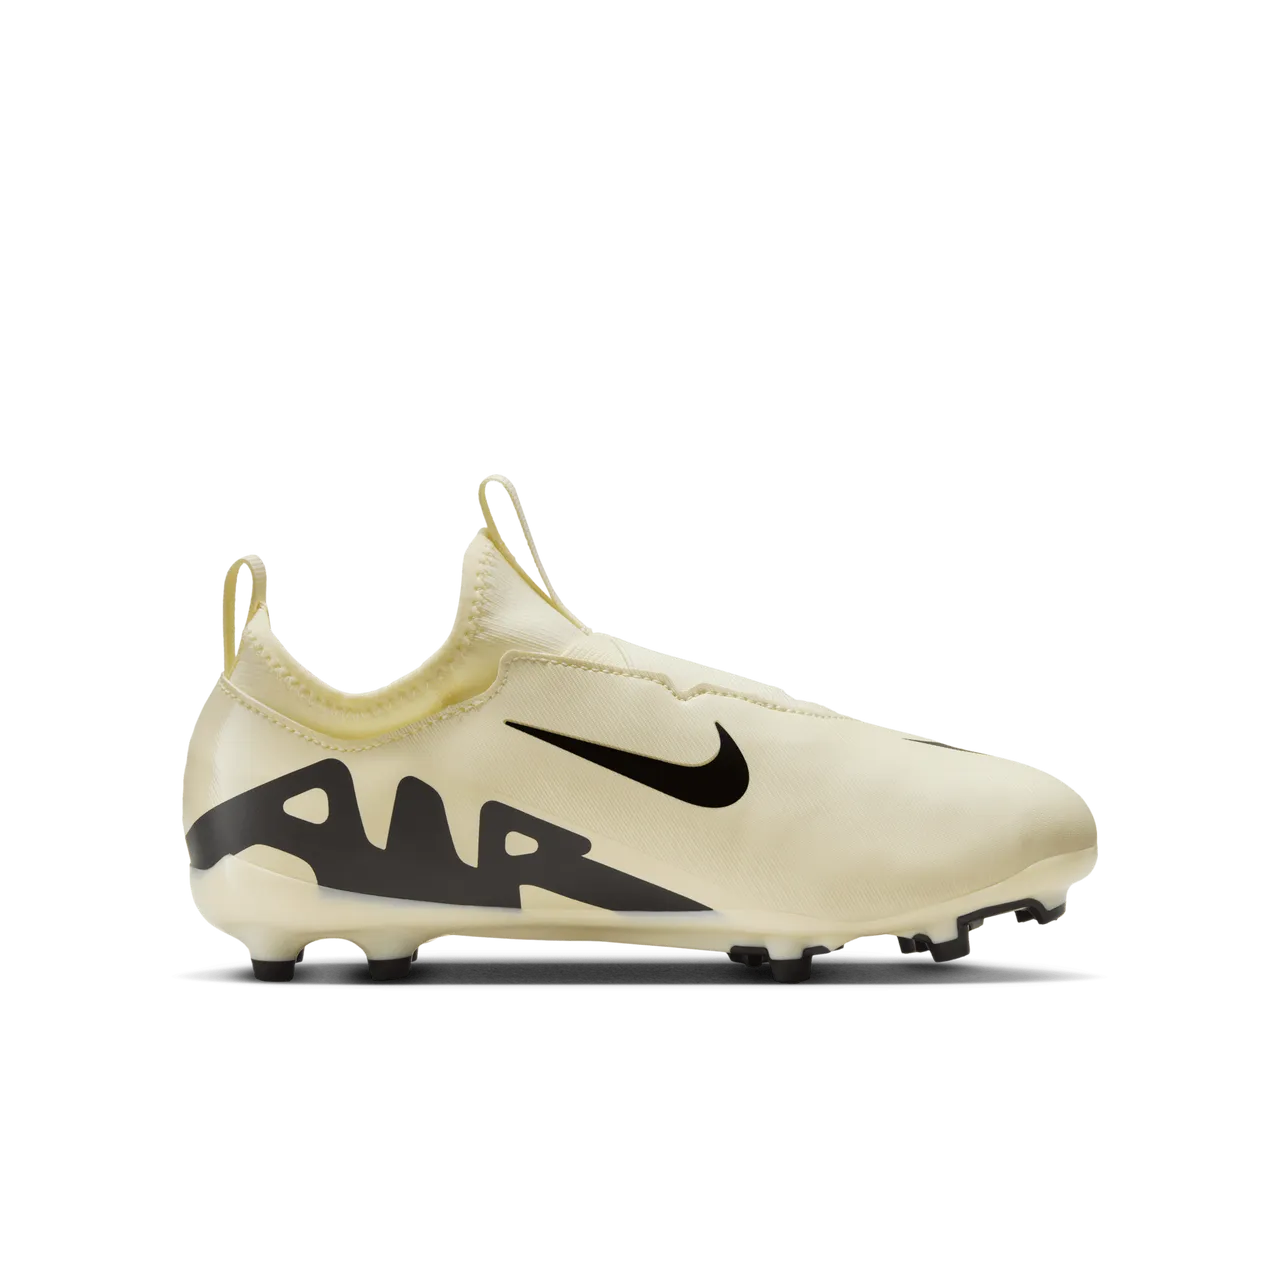 Nike Jr. Mercurial Vapor 15 Academy Younger/Older Kids' Multi-Ground Low-Top Football Boot - Yellow